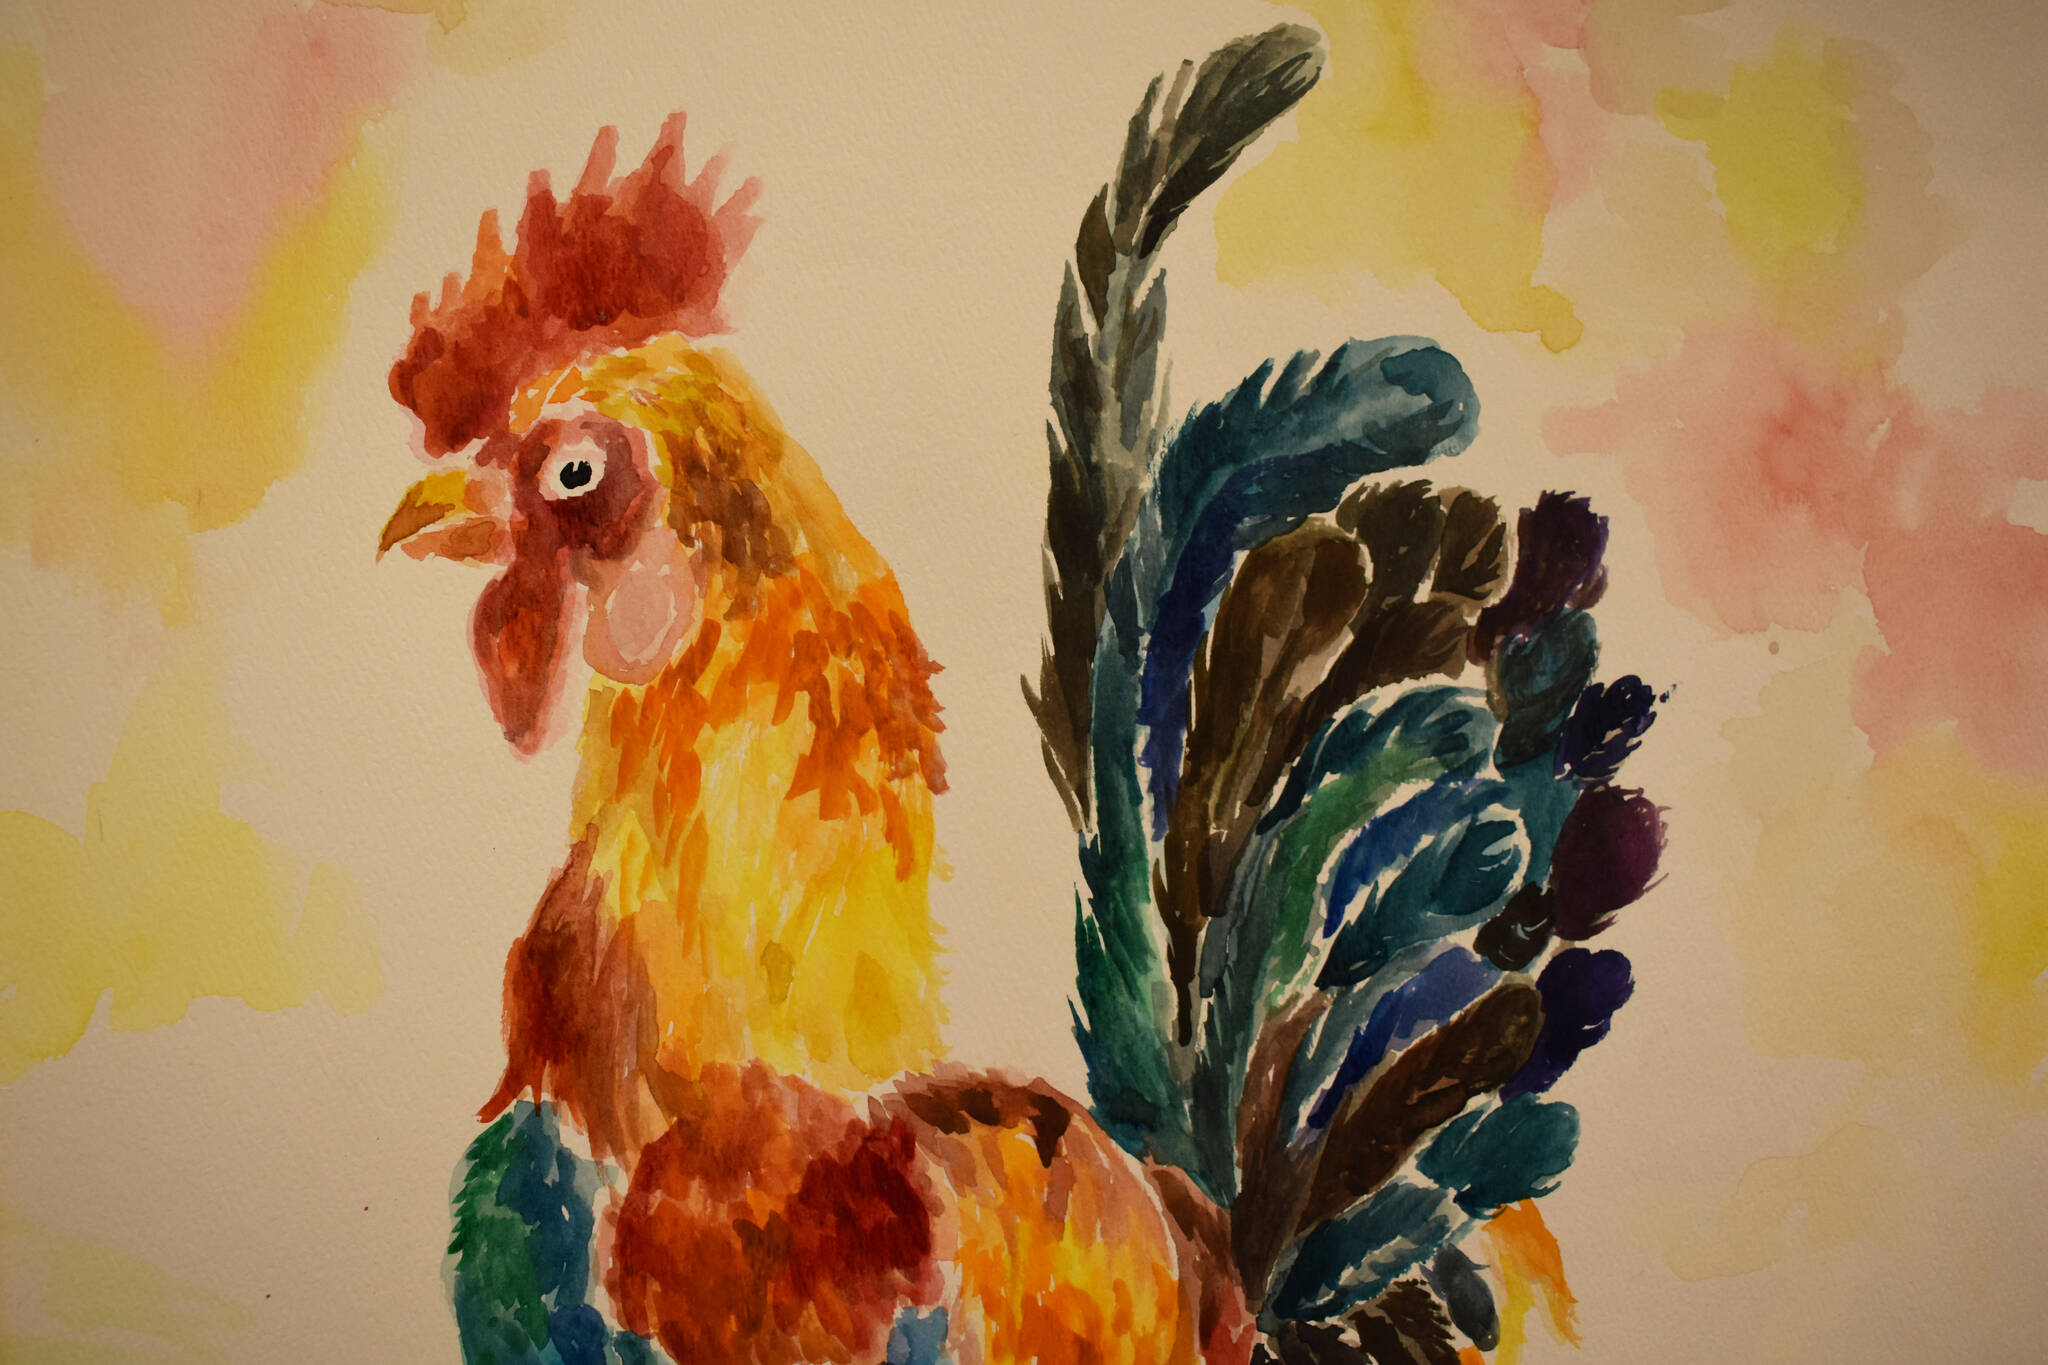 A colorful painting of a rooster hangs at the Kenai Art Center in Kenai, Alaska on Wednesday, April 5, 2023, in preparation for the debut of the 32nd Annual Kenai Peninsula Borough School District Visual Feast. (Jake Dye/Peninsula Clarion)